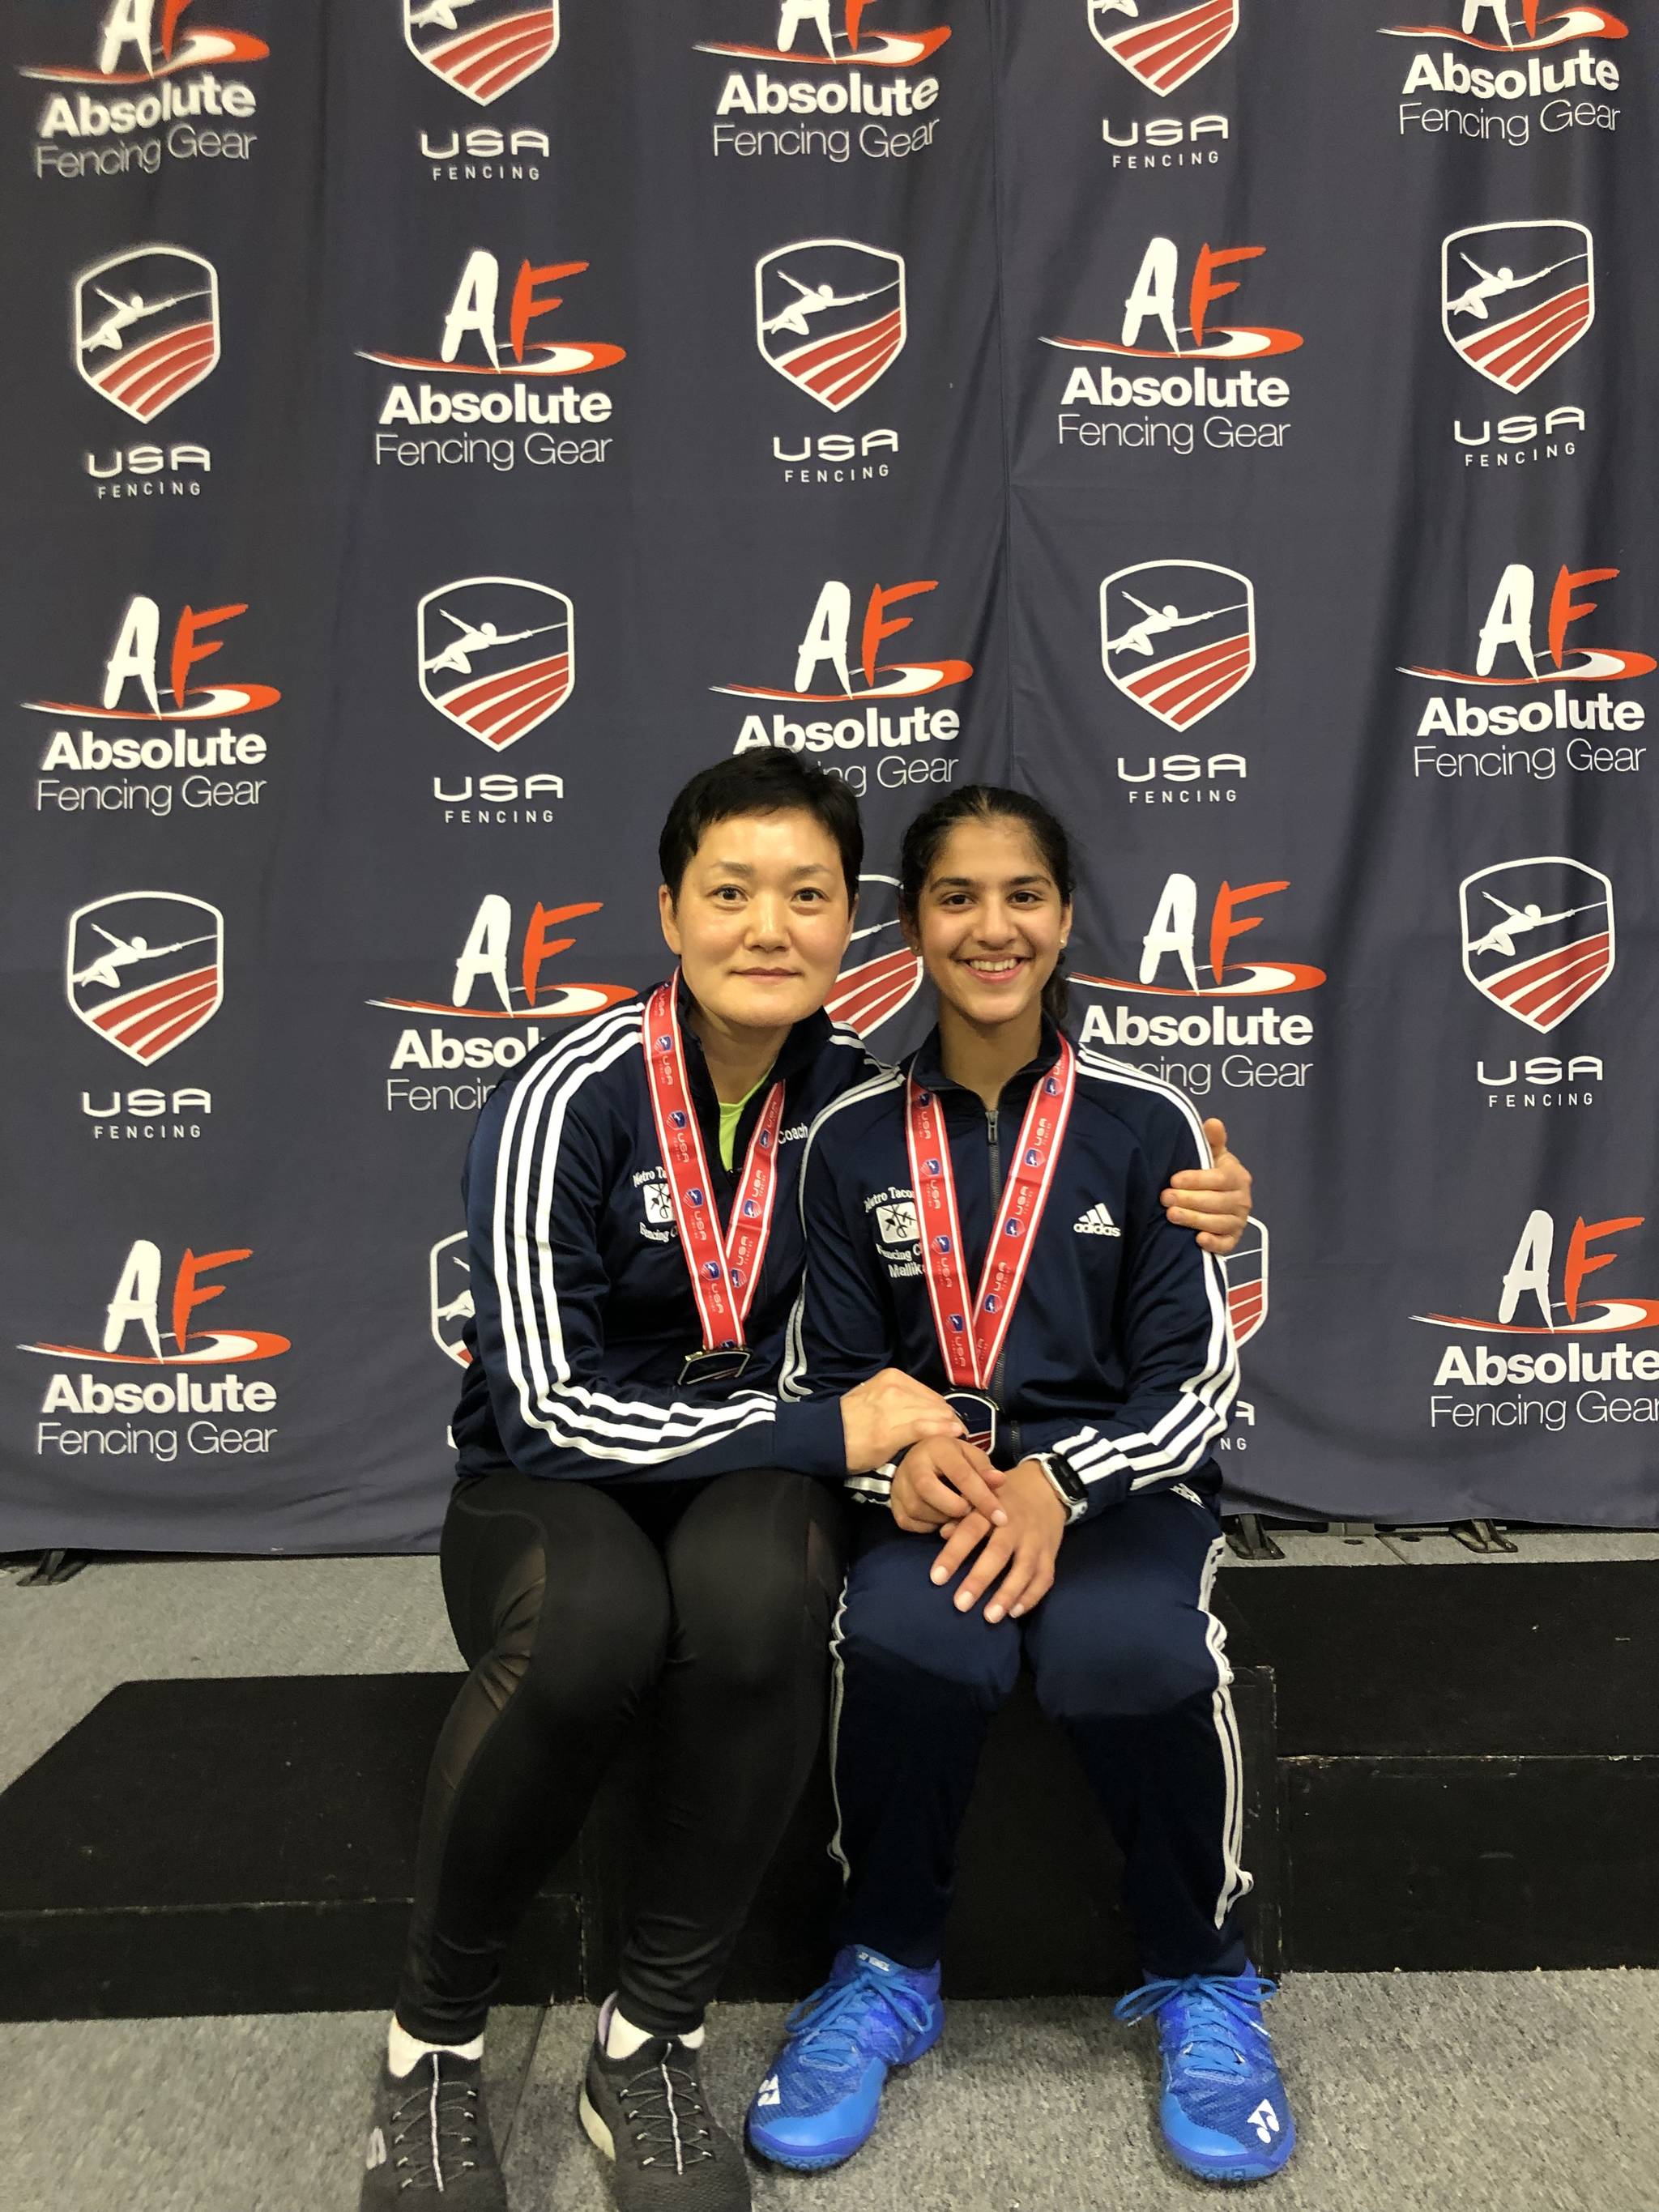 Twin sisters represent Redmond fencing academy at premier events